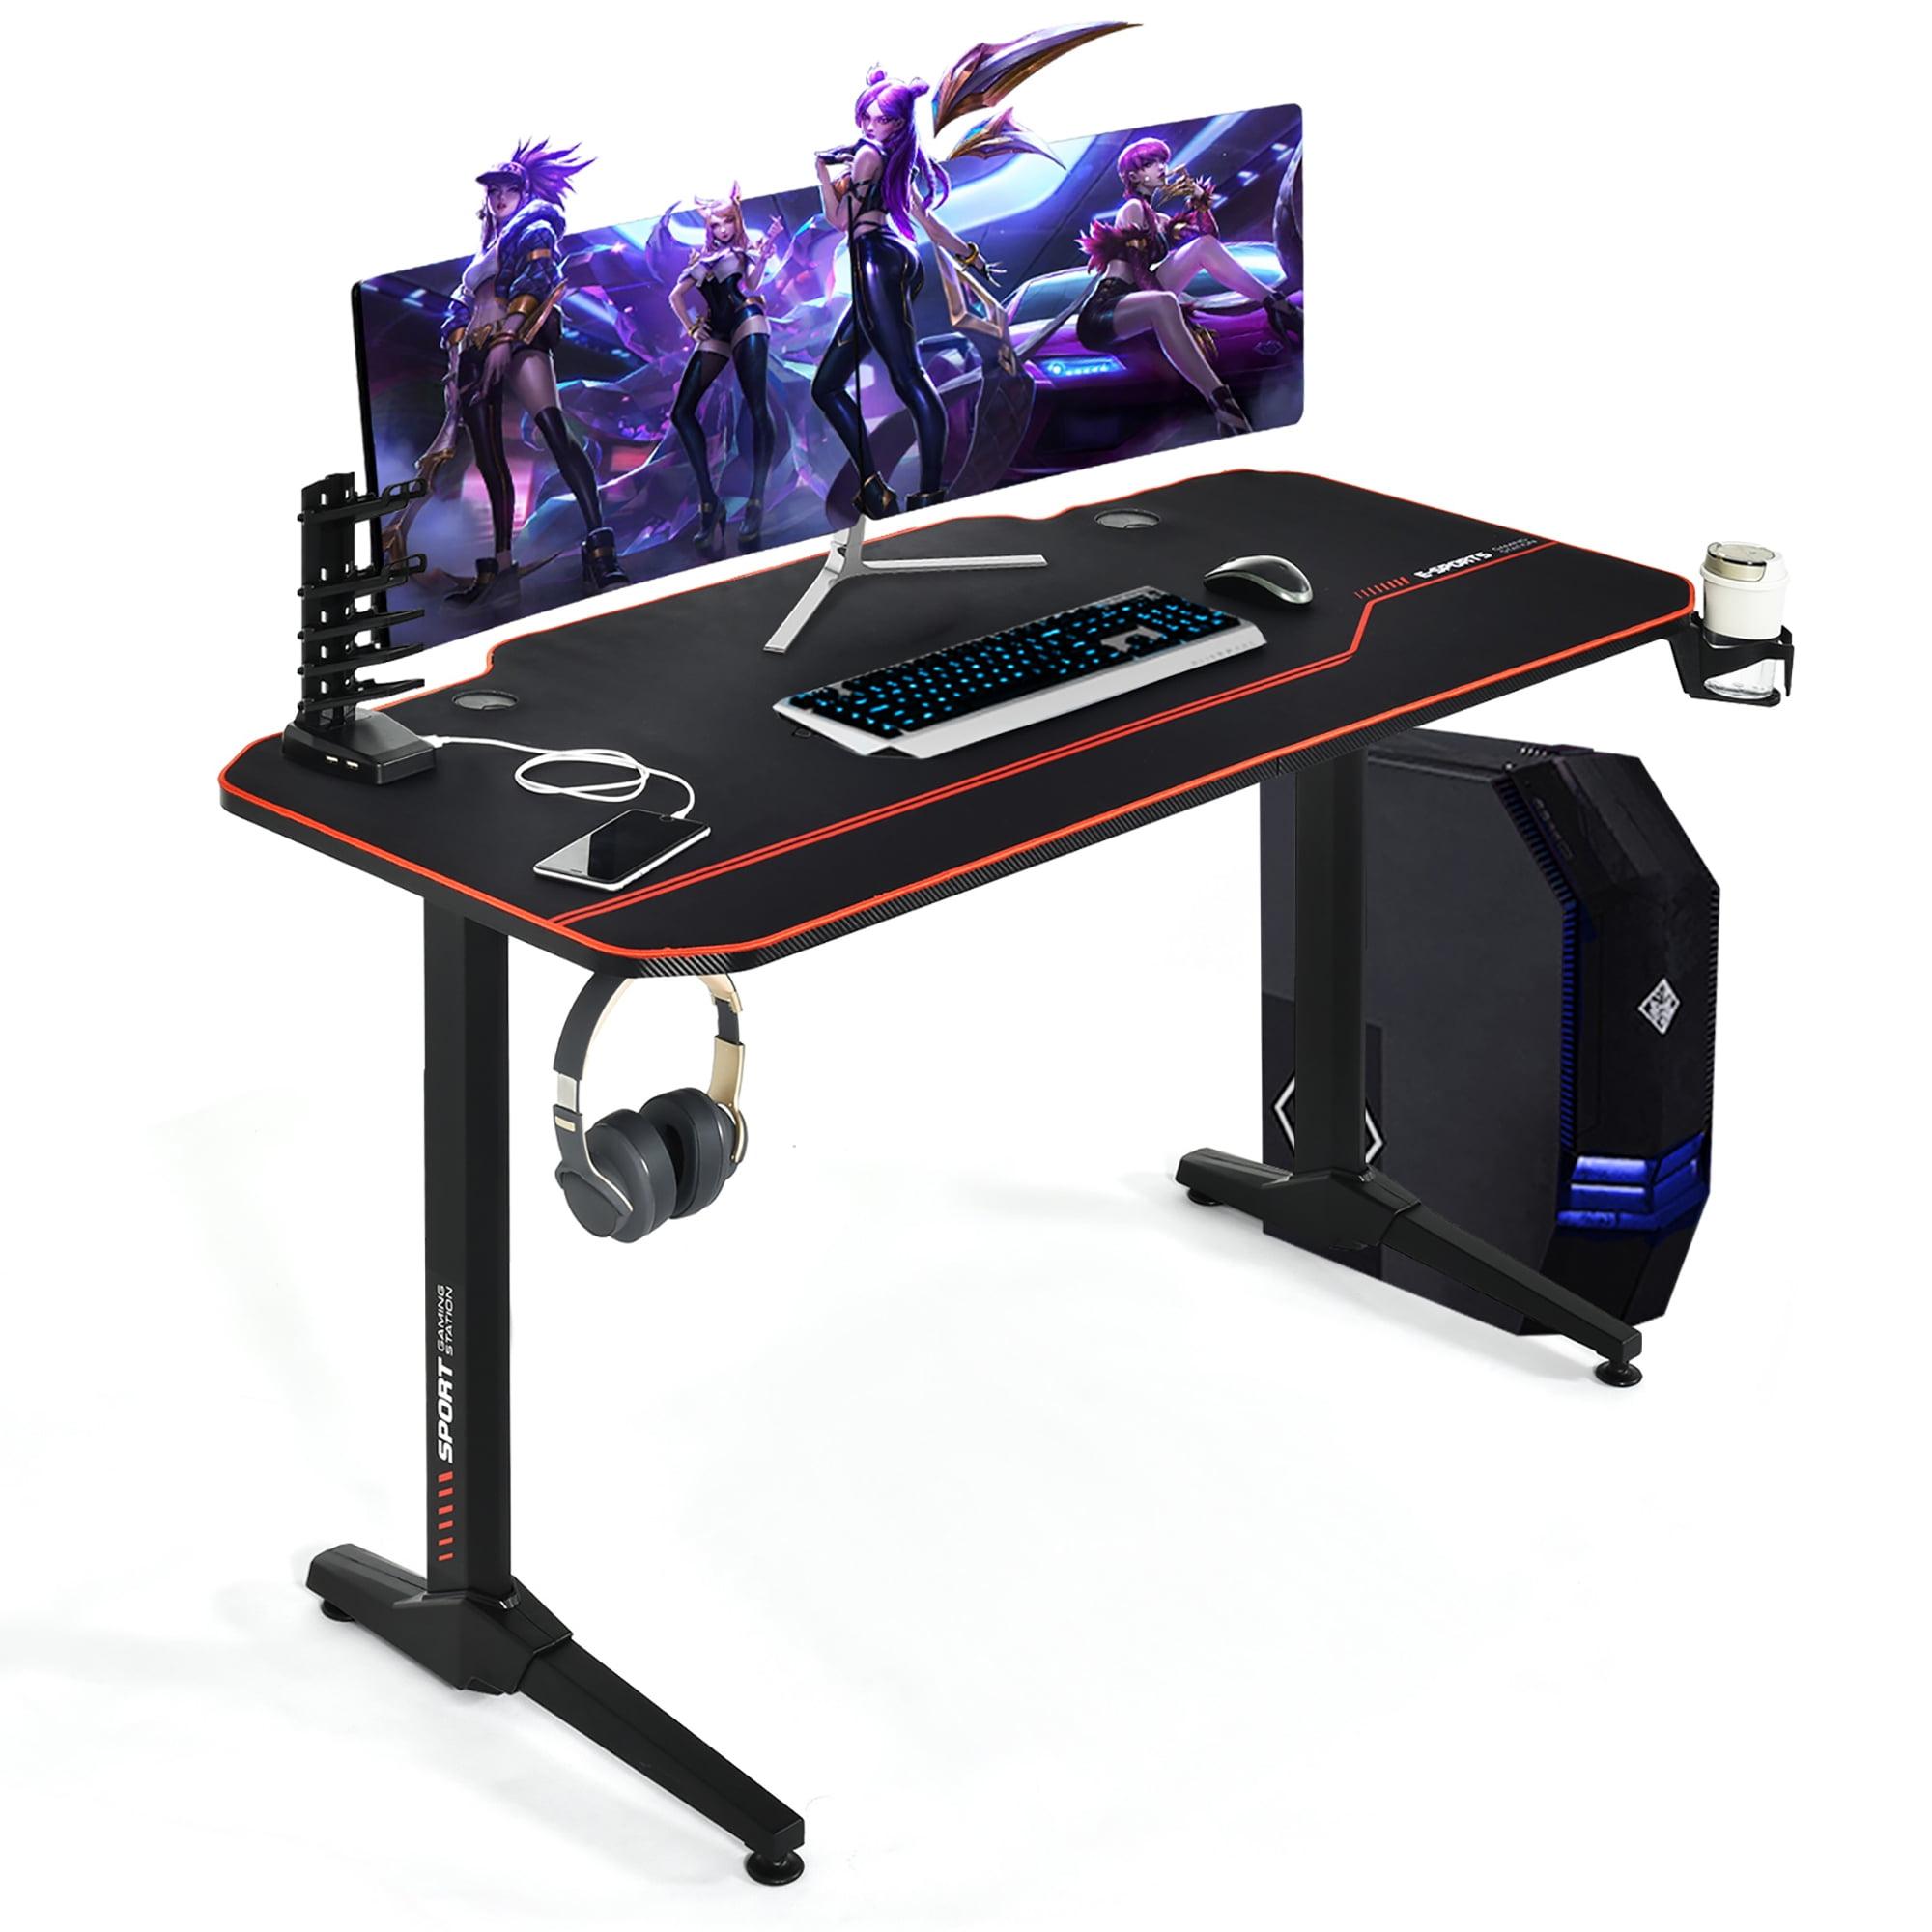 47'' Black Ergonomic Gaming Desk with Full-Desk Mouse Pad and USB Ports